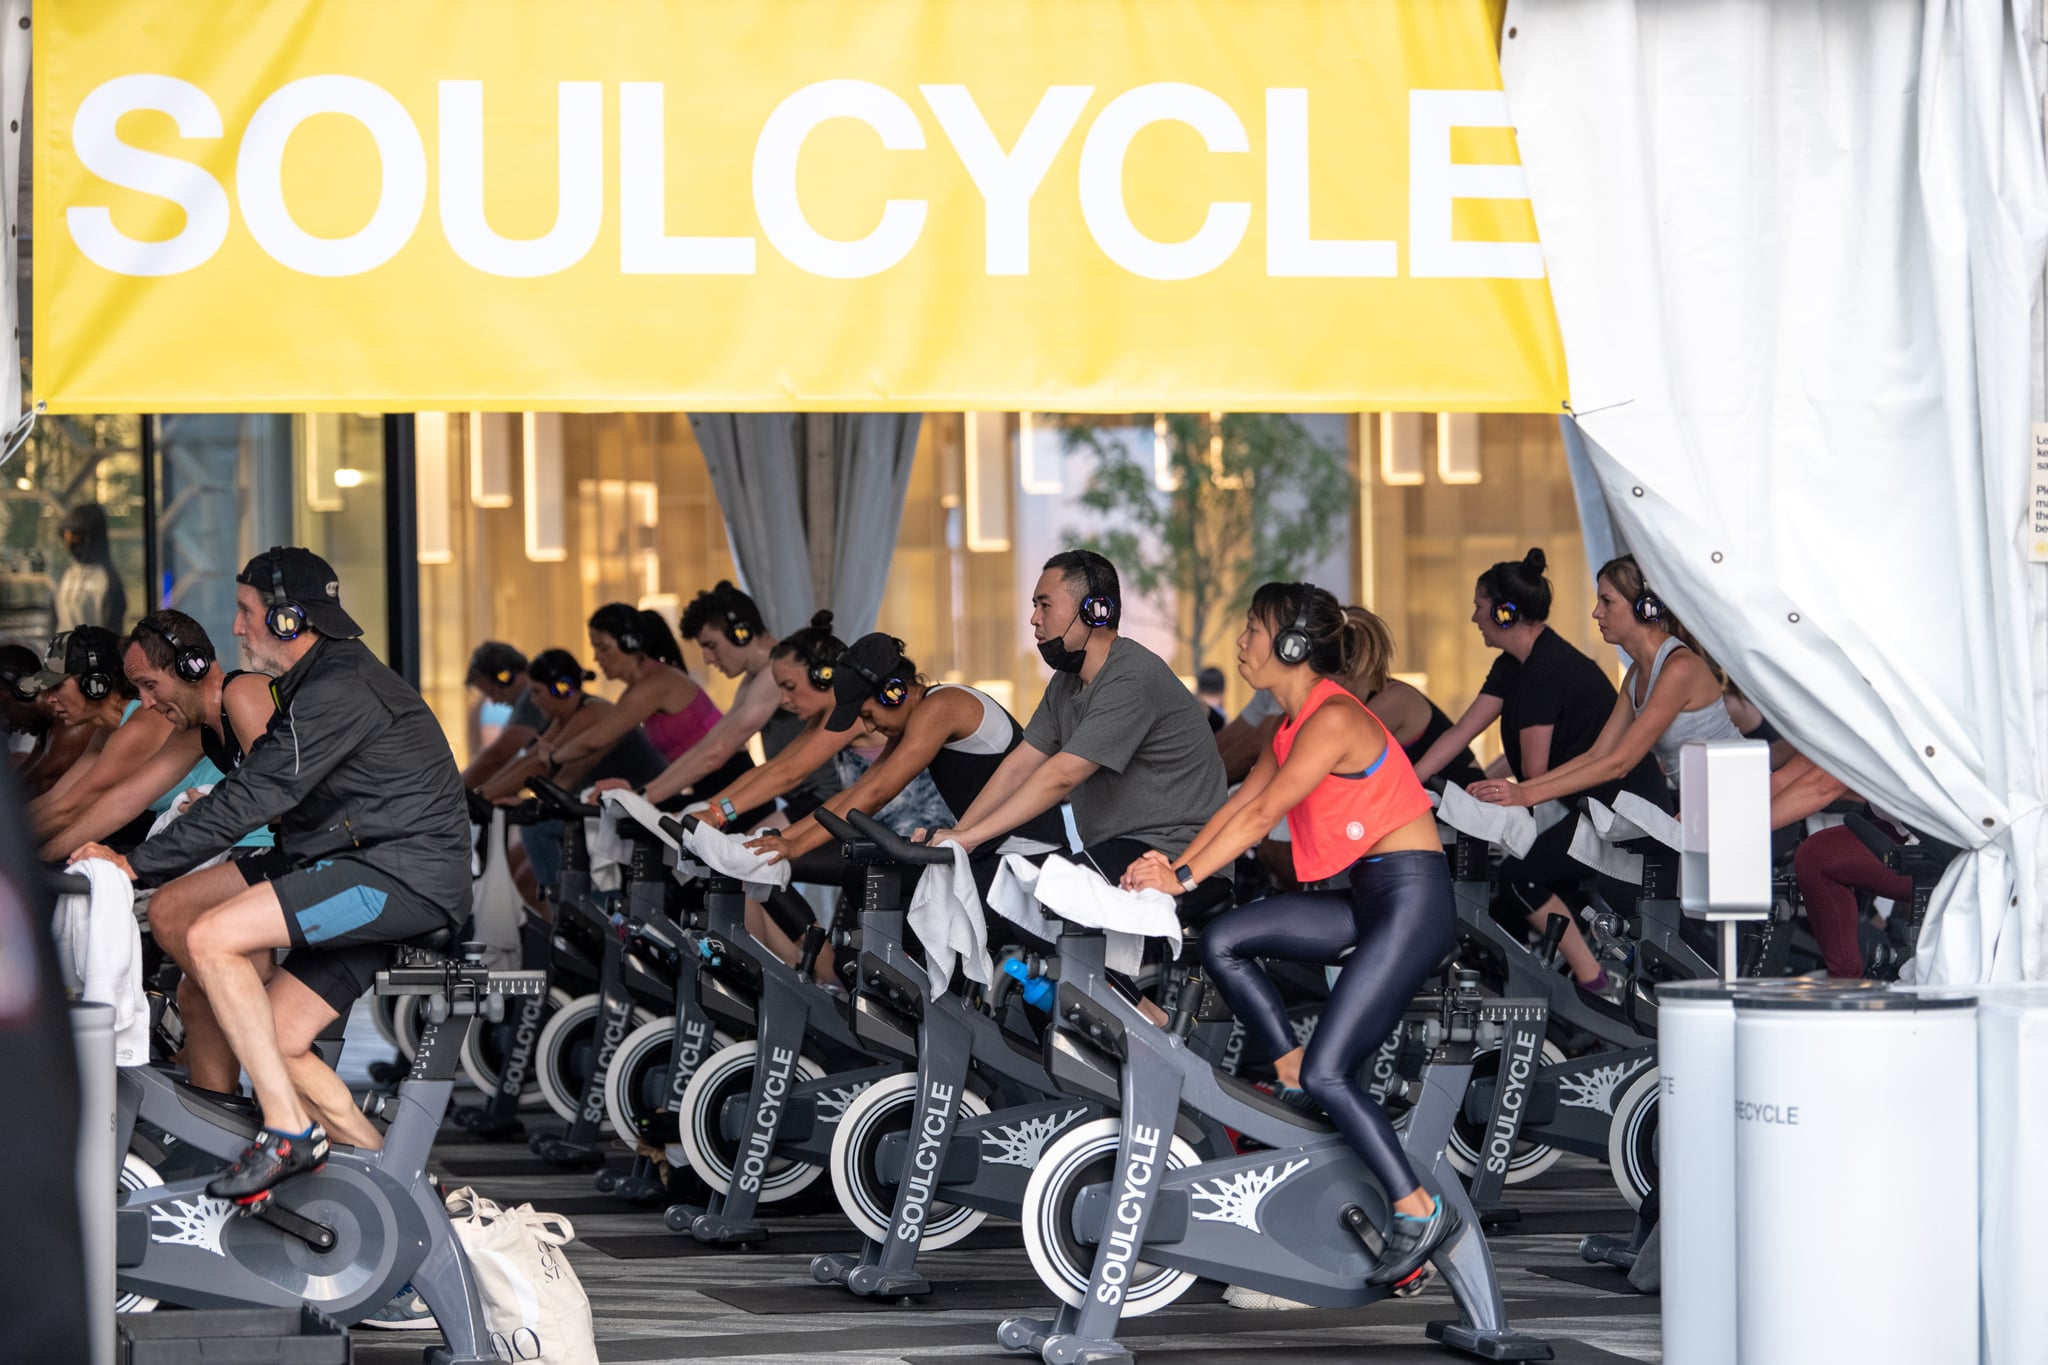 NEW YORK, NEW YORK - SEPTEMBER 24: A man wearing a pulled down mask attends a Soulcycle spin class at the Backyard in Hudson Yards as the city continues Phase 4 of re-opening following restrictions imposed to slow the spread of coronavirus on September 24, 2020 in New York City. The fourth phase allows outdoor arts and entertainment, sporting events without fans and media production.  (Photo by Alexi Rosenfeld/Getty Images)